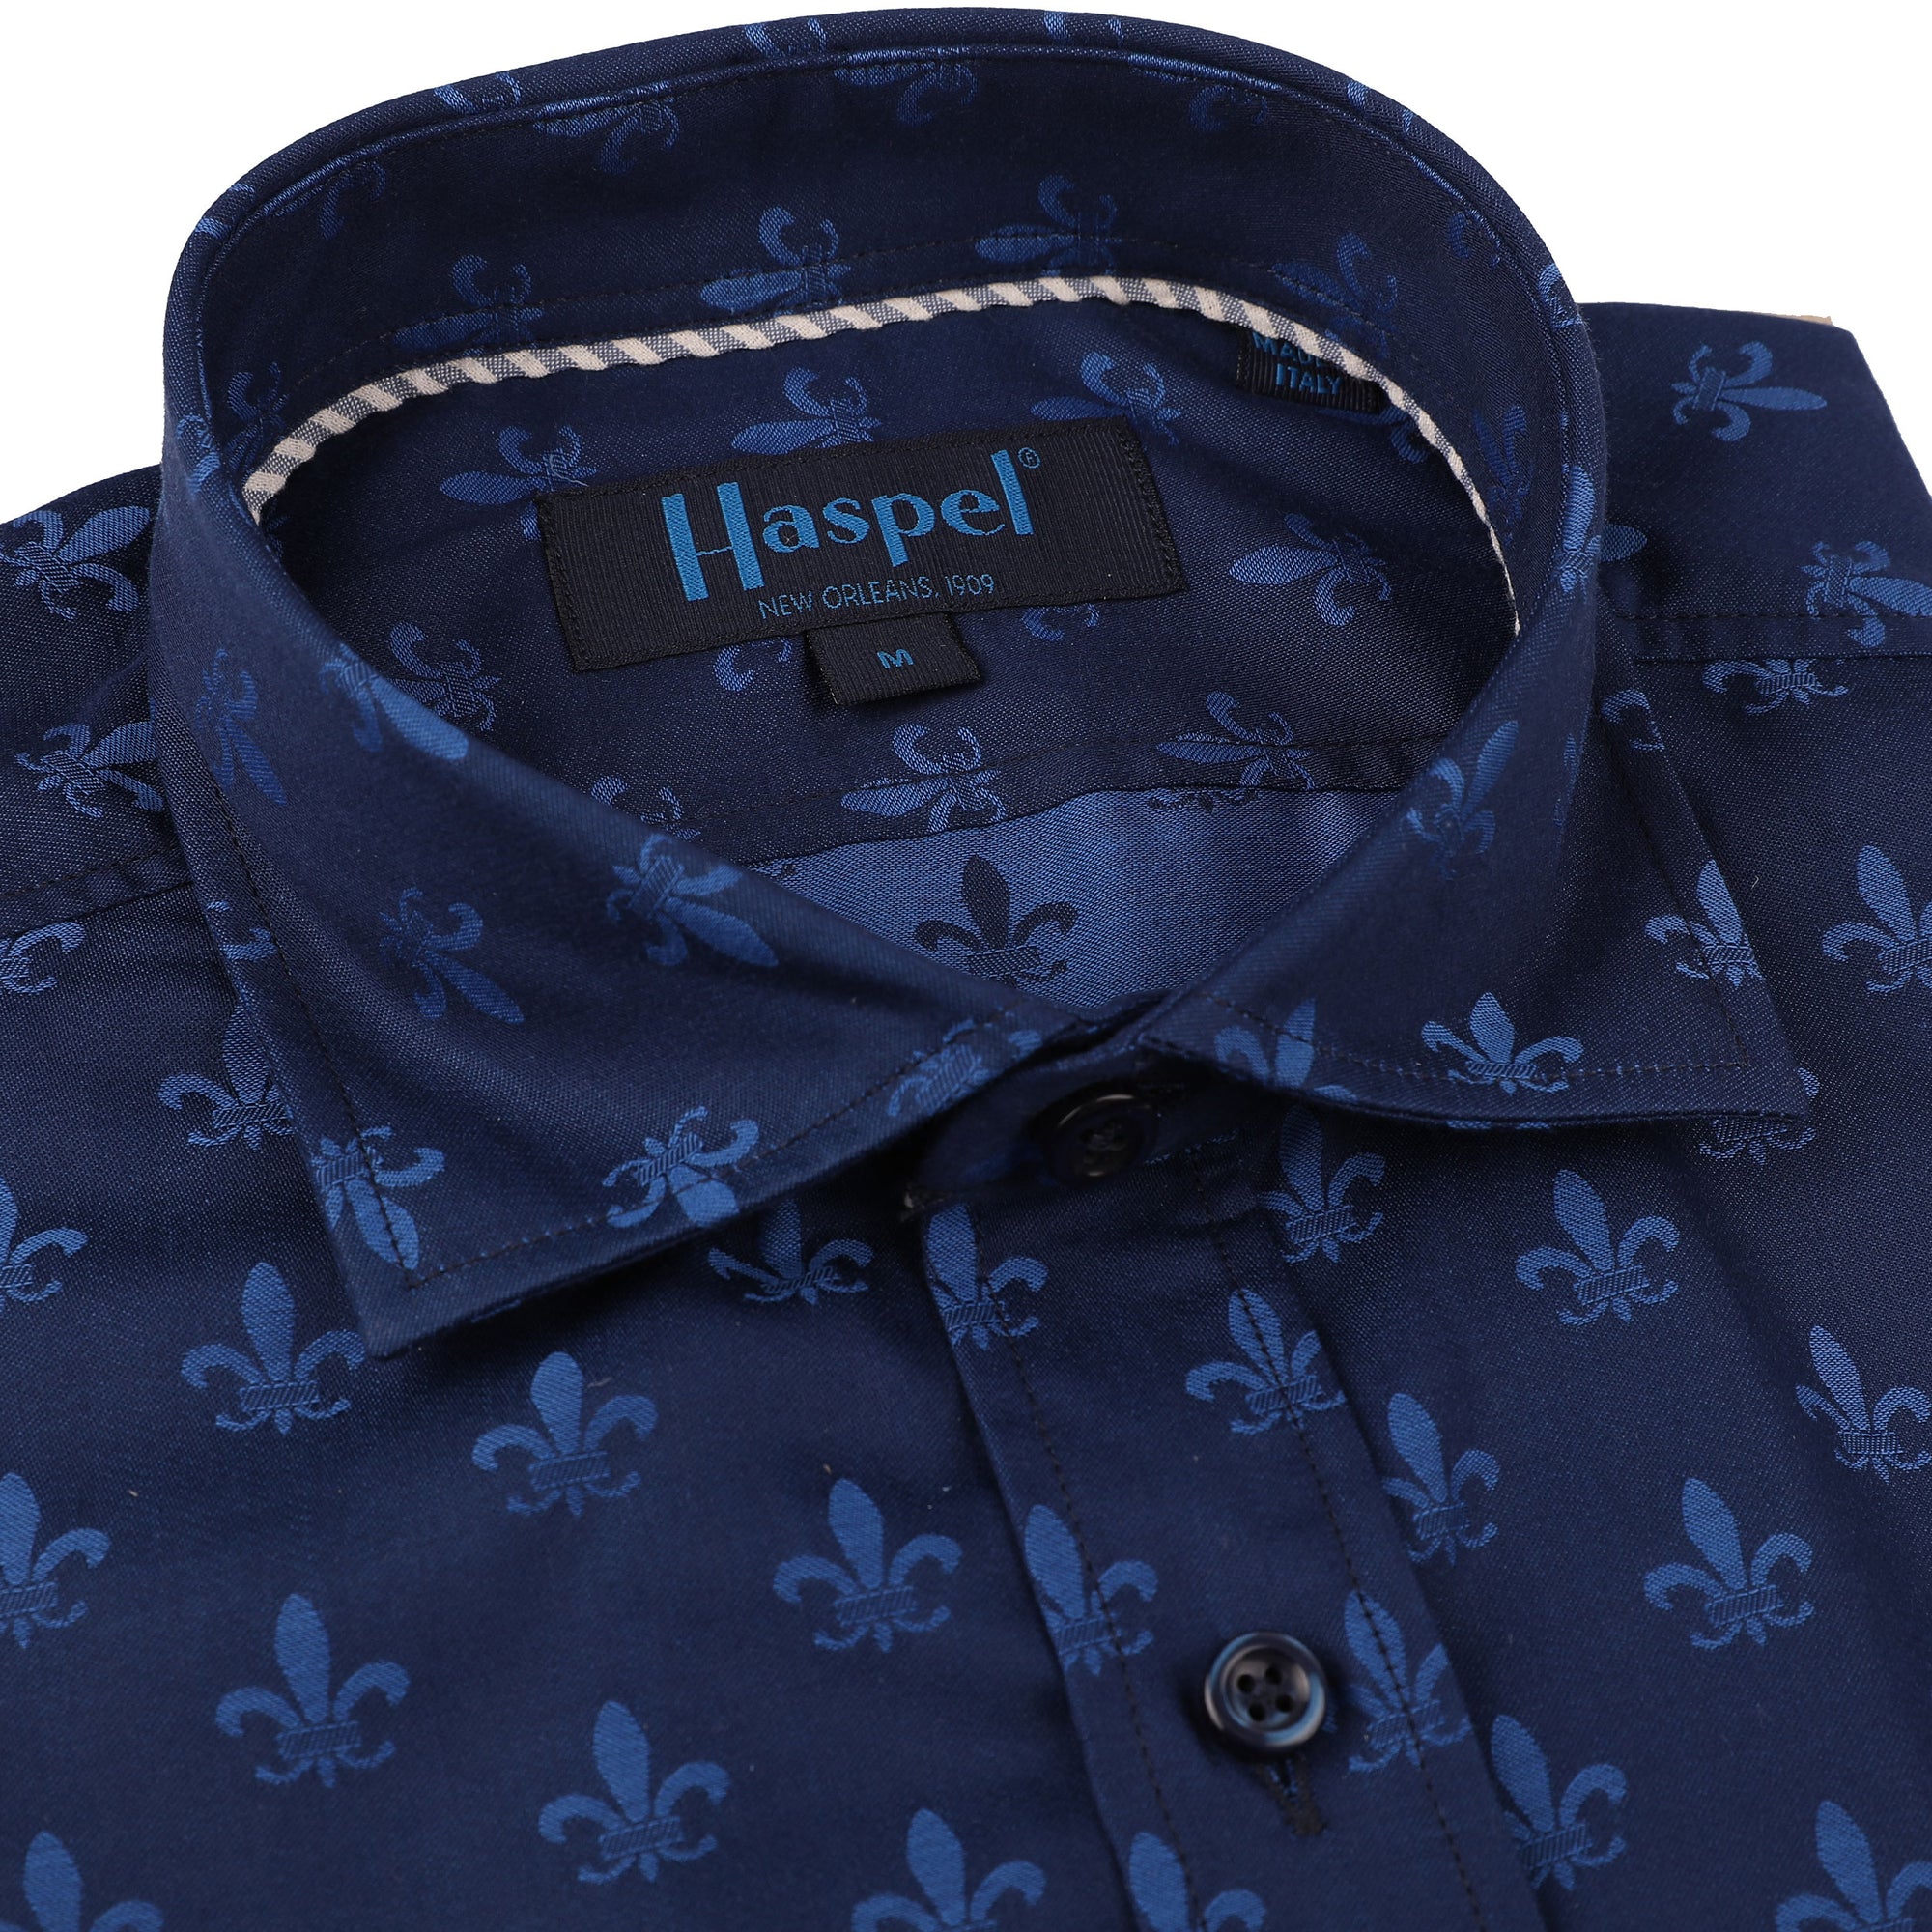 Let your New Orleans style shine with this Carroll Royal Blue Fleur De Lis Sport Shirt. Featuring a subtle fleur de lis pattern and navy-blue buttons, this sporty, yet stylish, shirt will be the talk of the town! Show off your chic Louisiana flair in this royal blue beauty fit for a King.  100% Cotton • Spread Collar • Long Sleeve • Machine Washable • Made in Italy • Return Policy